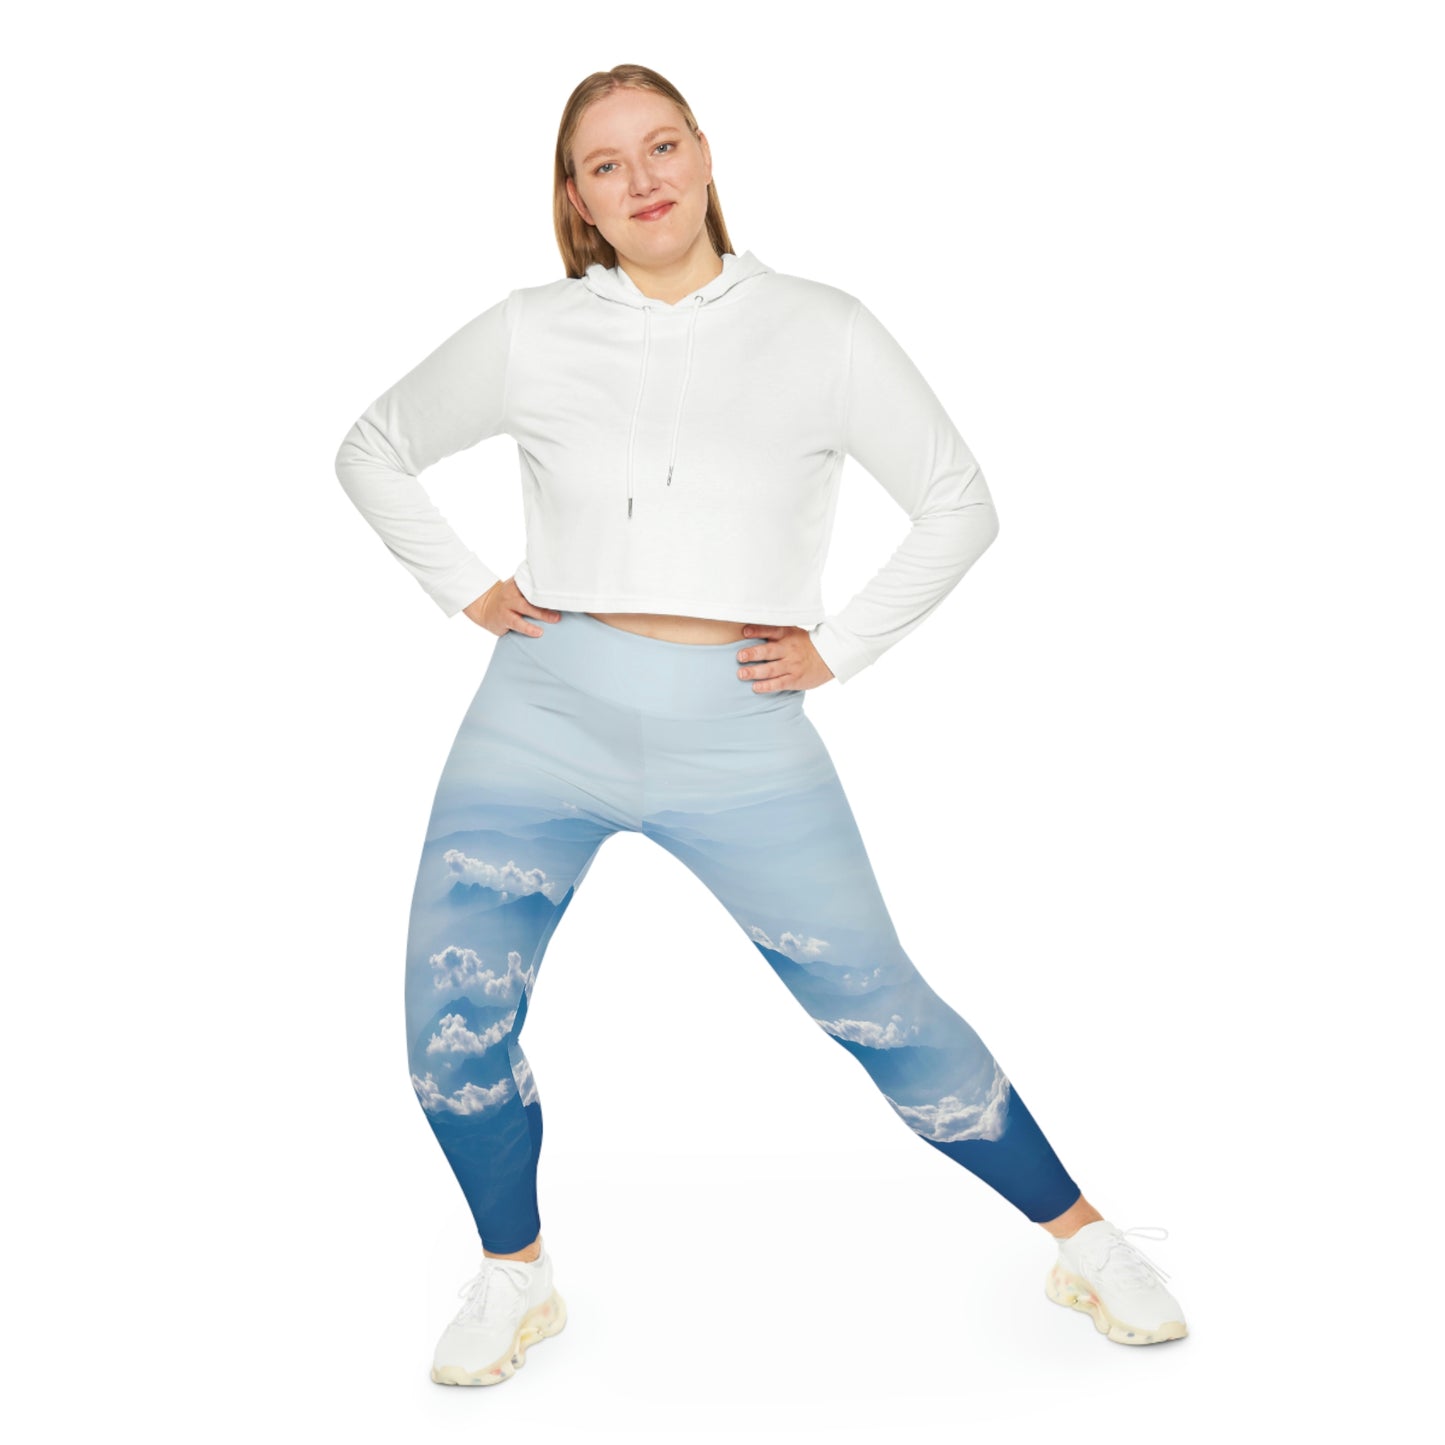 Clouds Plus Size Leggings Plus Size Leggings One of a Kind Gift - Unique Workout Activewear tights for Mom fitness, Mothers Day, Girlfriend Christmas Gift